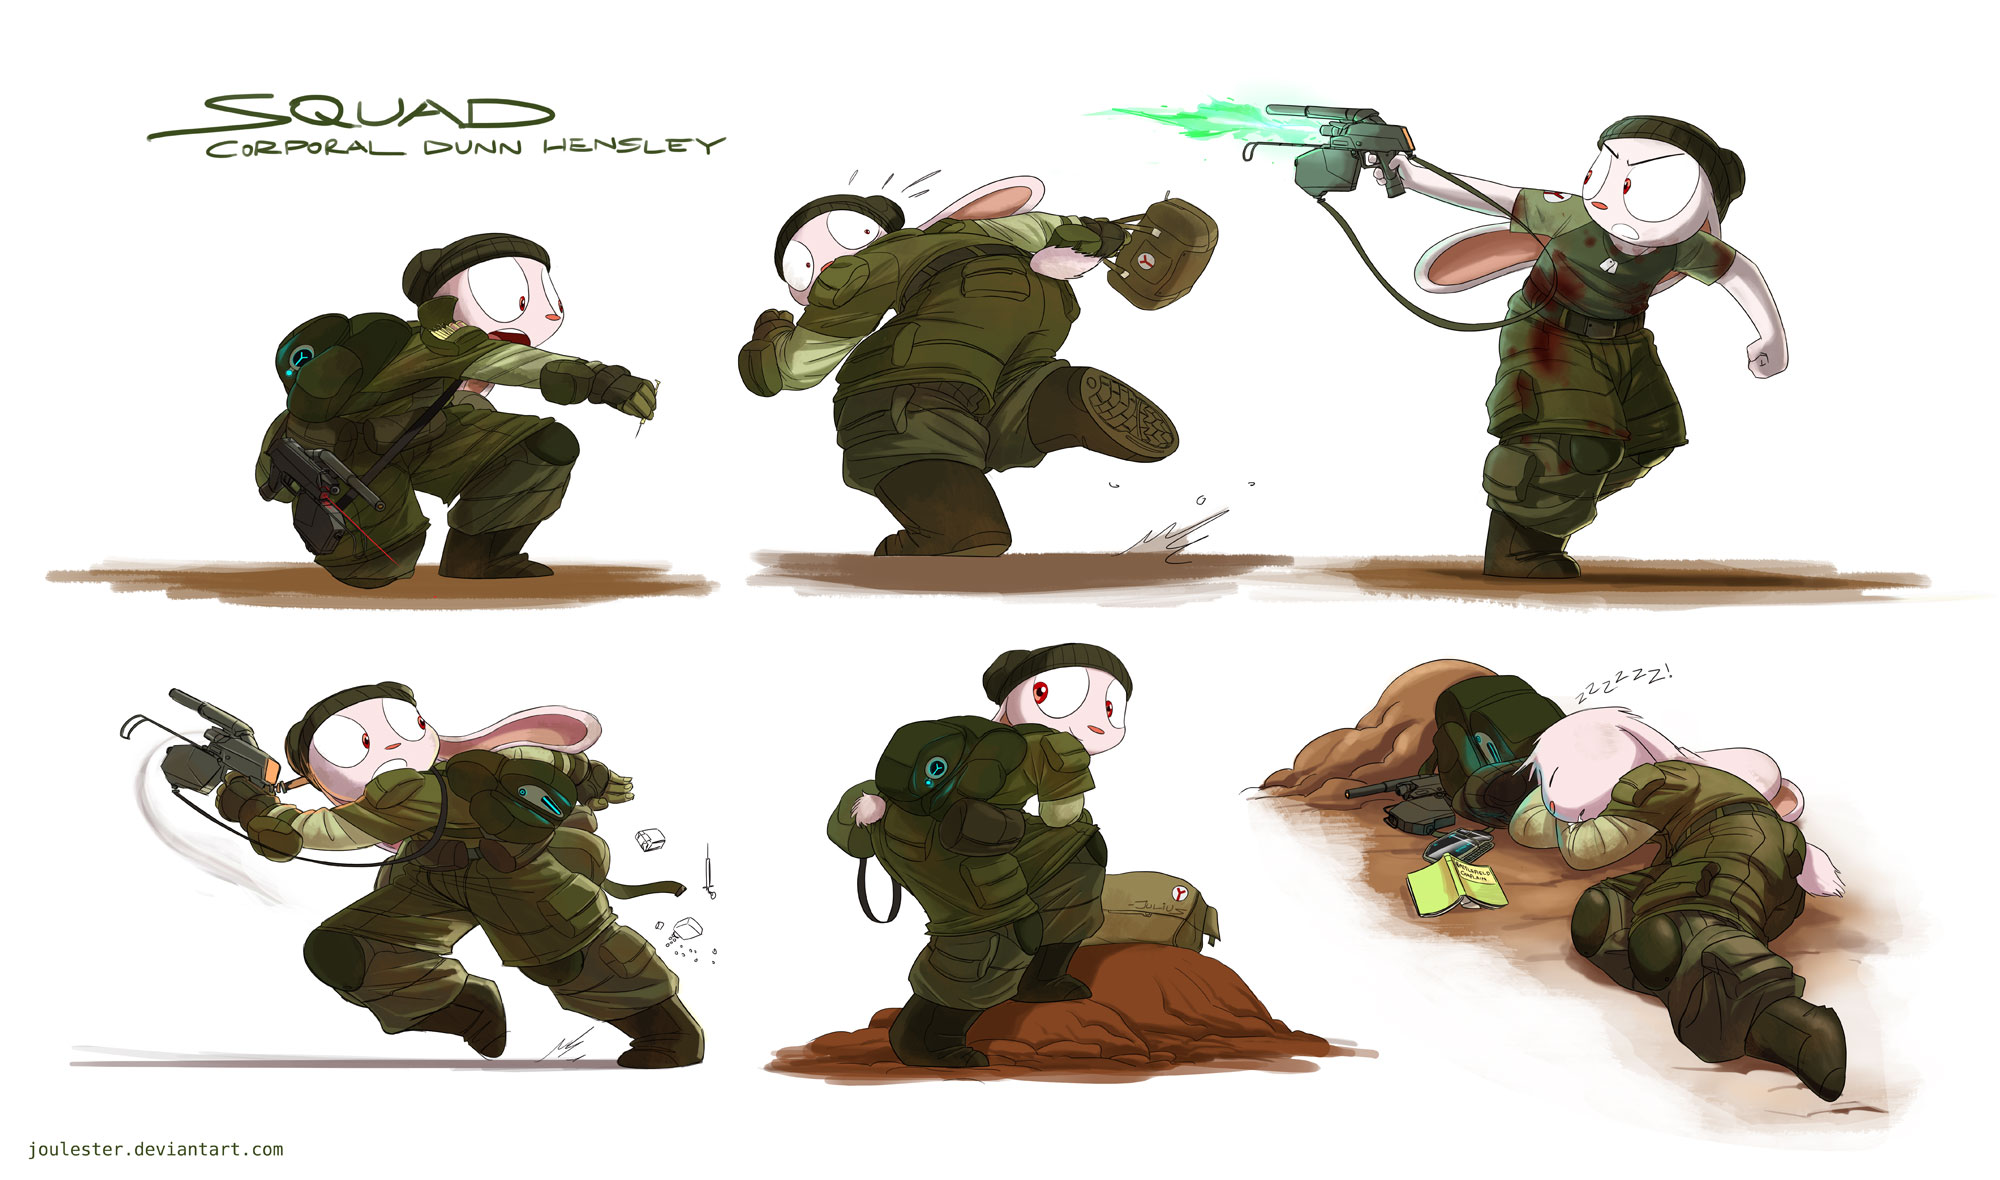 Corporal Dunn action poses